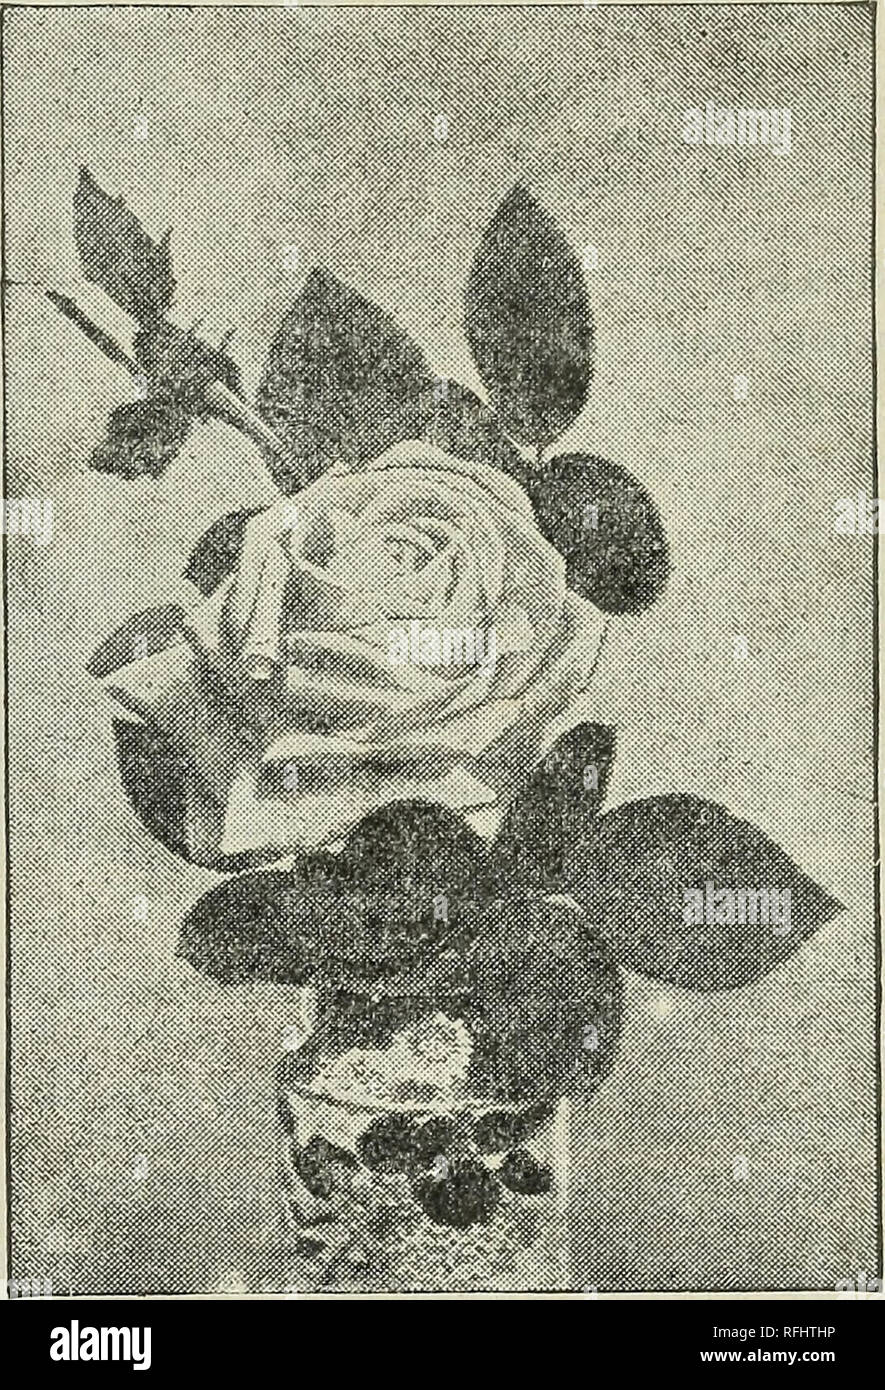 . The Champion City Greenhouses : trade list. Nursery stock Ohio Springfield Catalogs; Plants, Ornamental Catalogs; Roses Catalogs; Flowers Catalogs; Bulbs (Plants) Catalogs. U.1.LPWIN. This is a new pink Rose that will, as soon as it becomes known, be placed in the front rank with the best Roses. It is a vigorous grower, making- handsome bushes, each shoot crowned with its large, handsome buds and blooms. The color is a deep rose. It is of the largest size, very full and double. We consider it a gem. 20 cents each; $1.25 per dozen. GRUSS AN TEPIilTZ. The Great New Red Rose frojn Germany. Mock Stock Photo